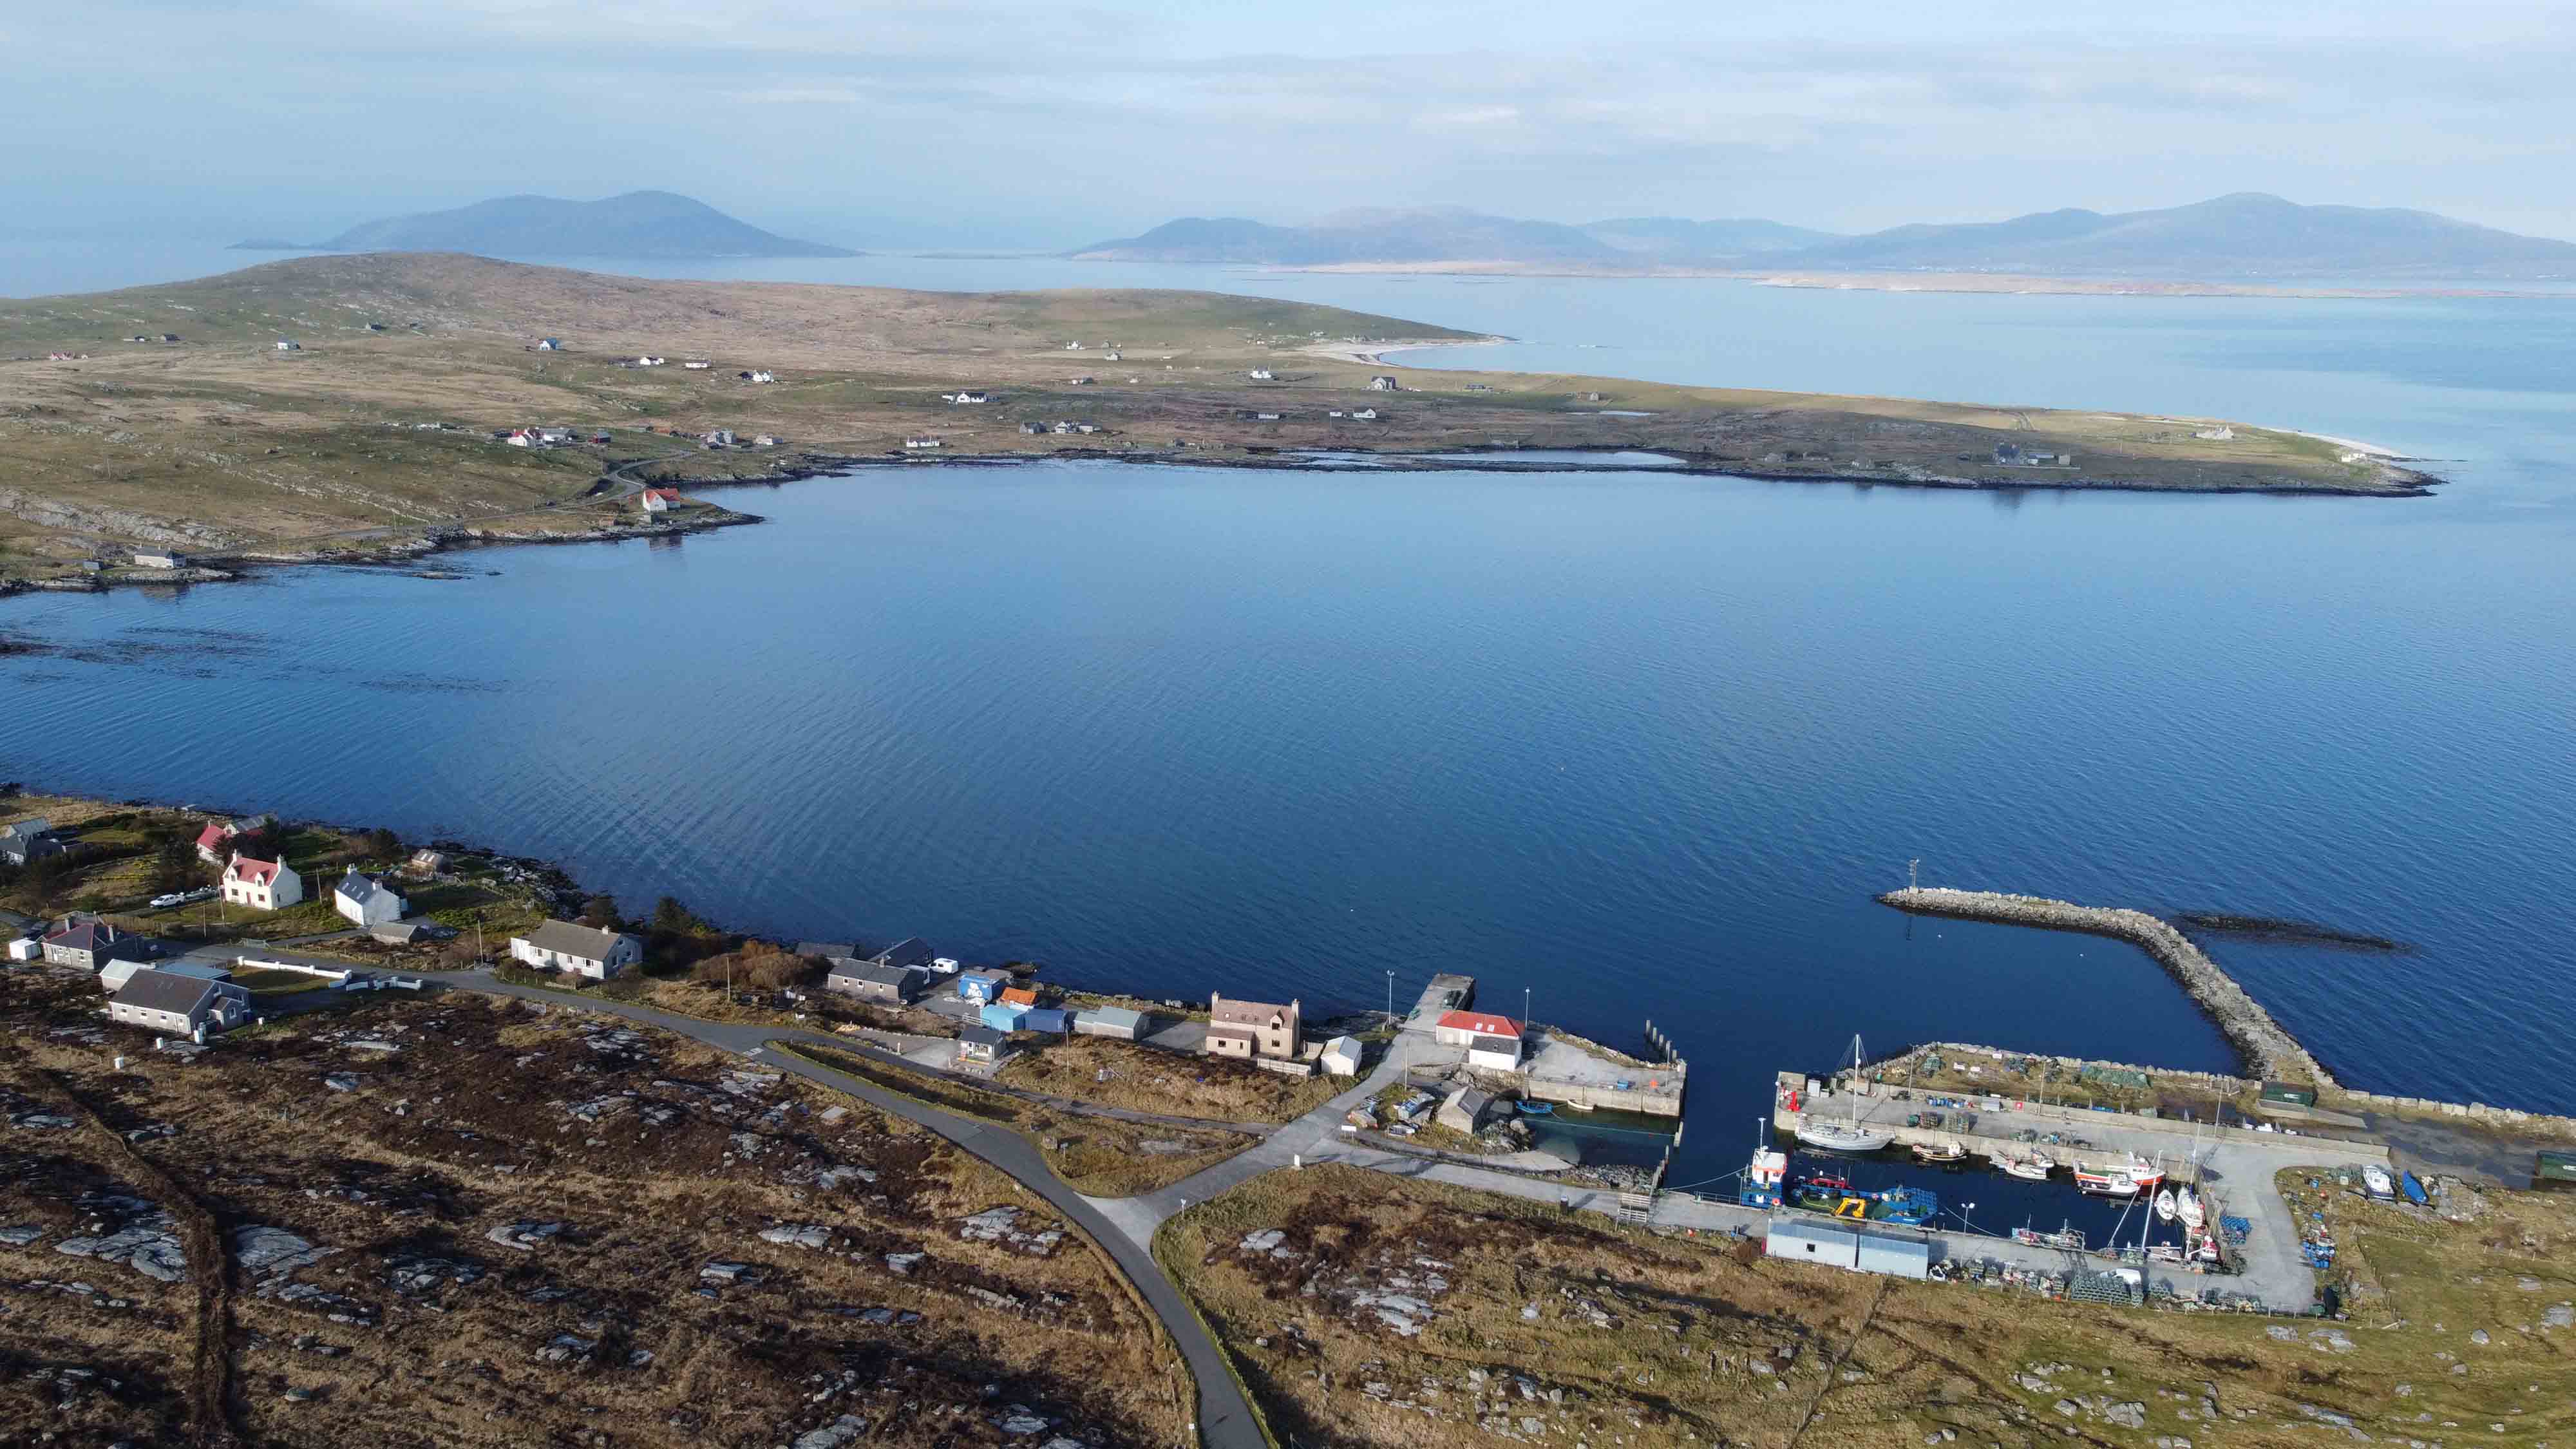 Arial view of Bays Loch Berneray